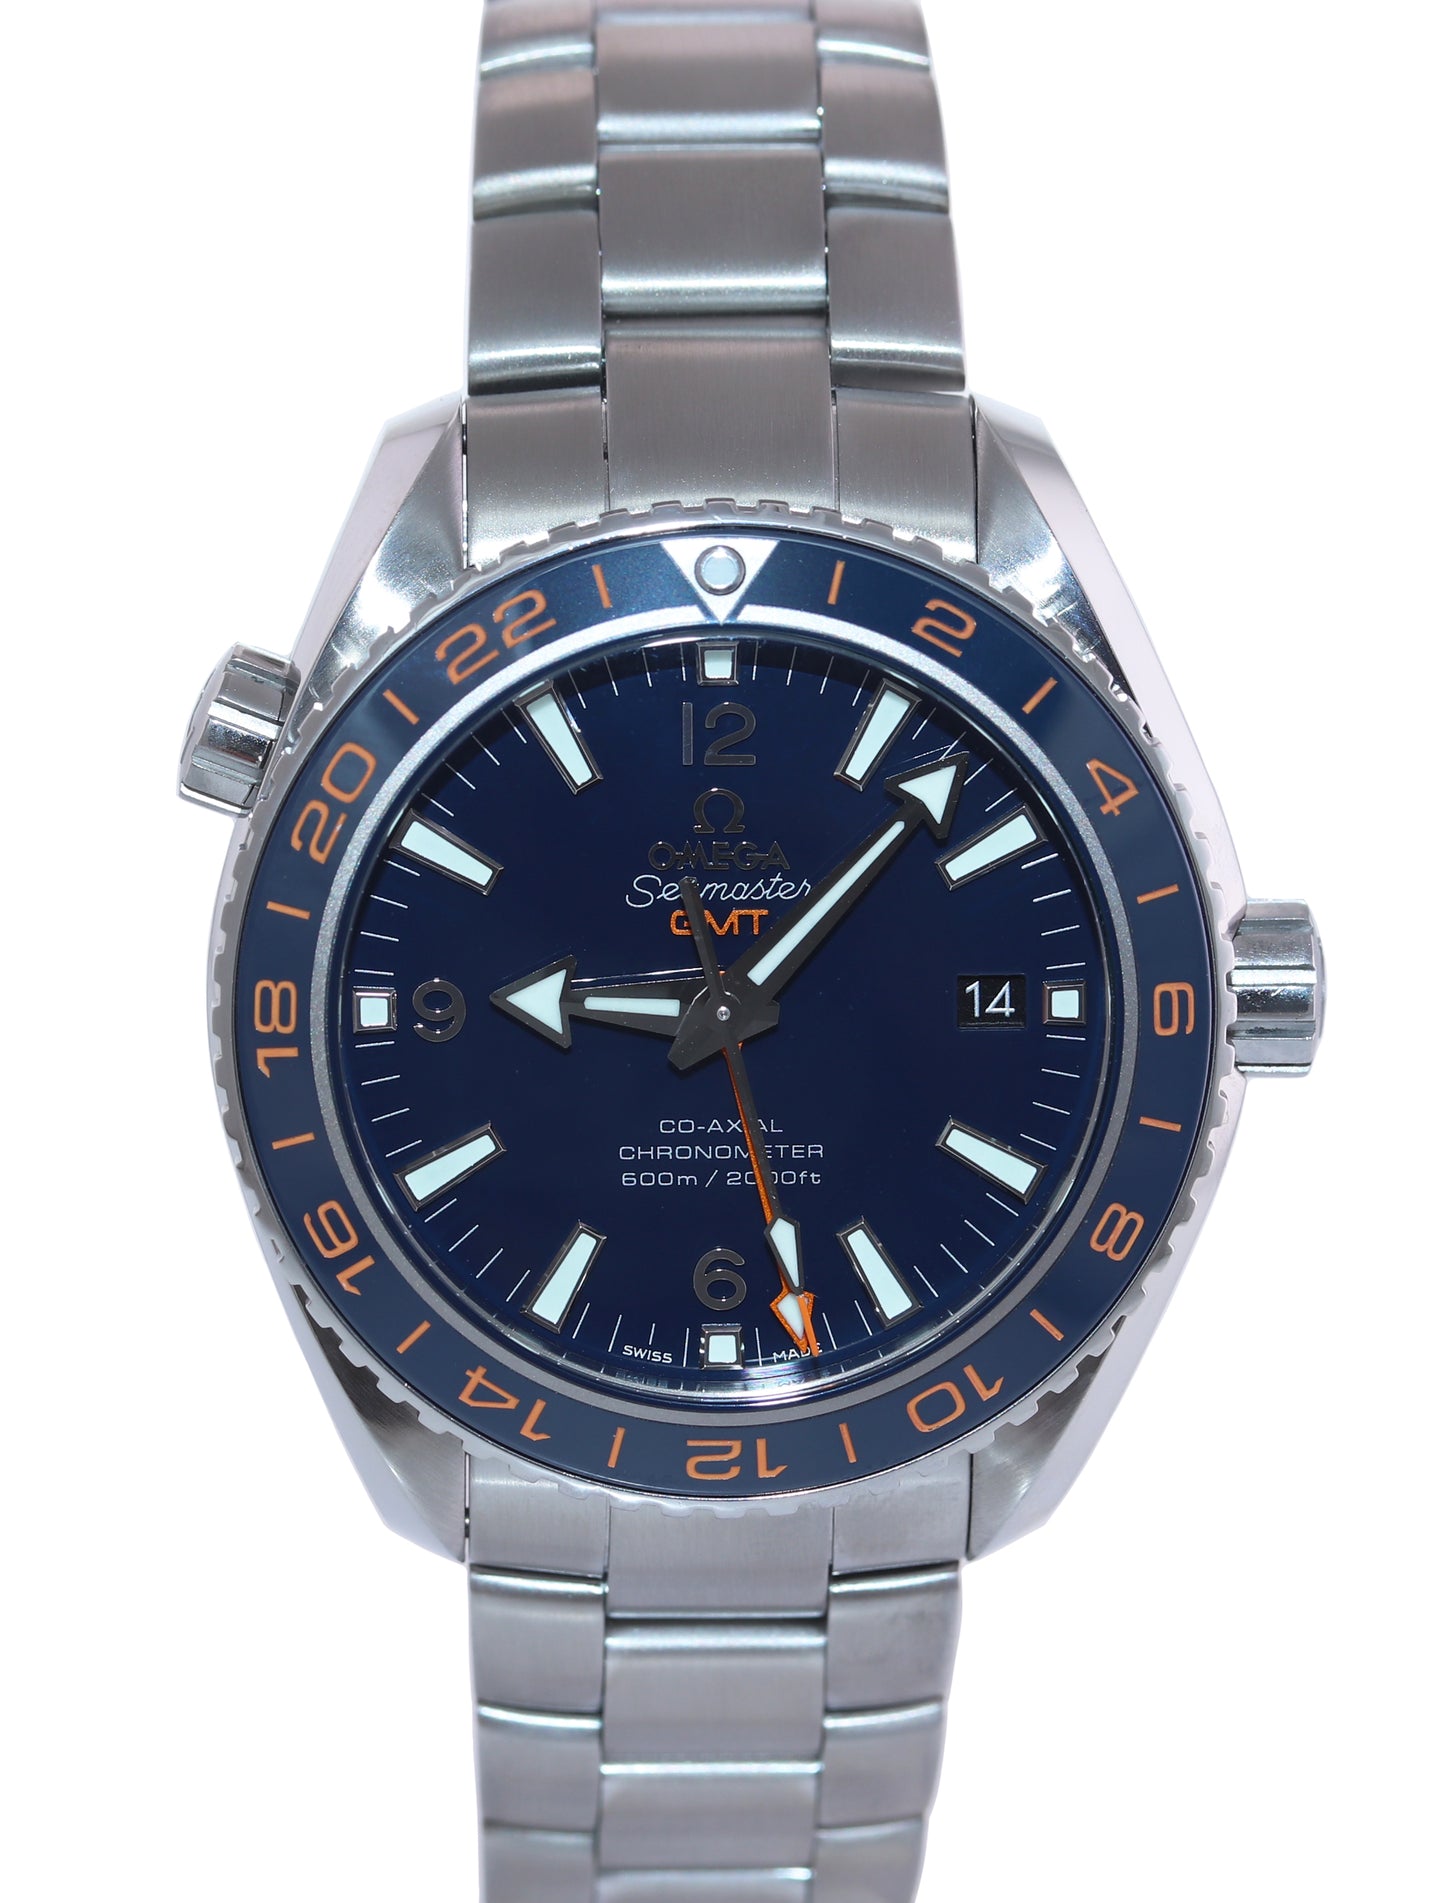 PAPERS Omega Seamaster Good Planet Ocean GMT 232.30.44.22.03.001 Blue 44mm Watch